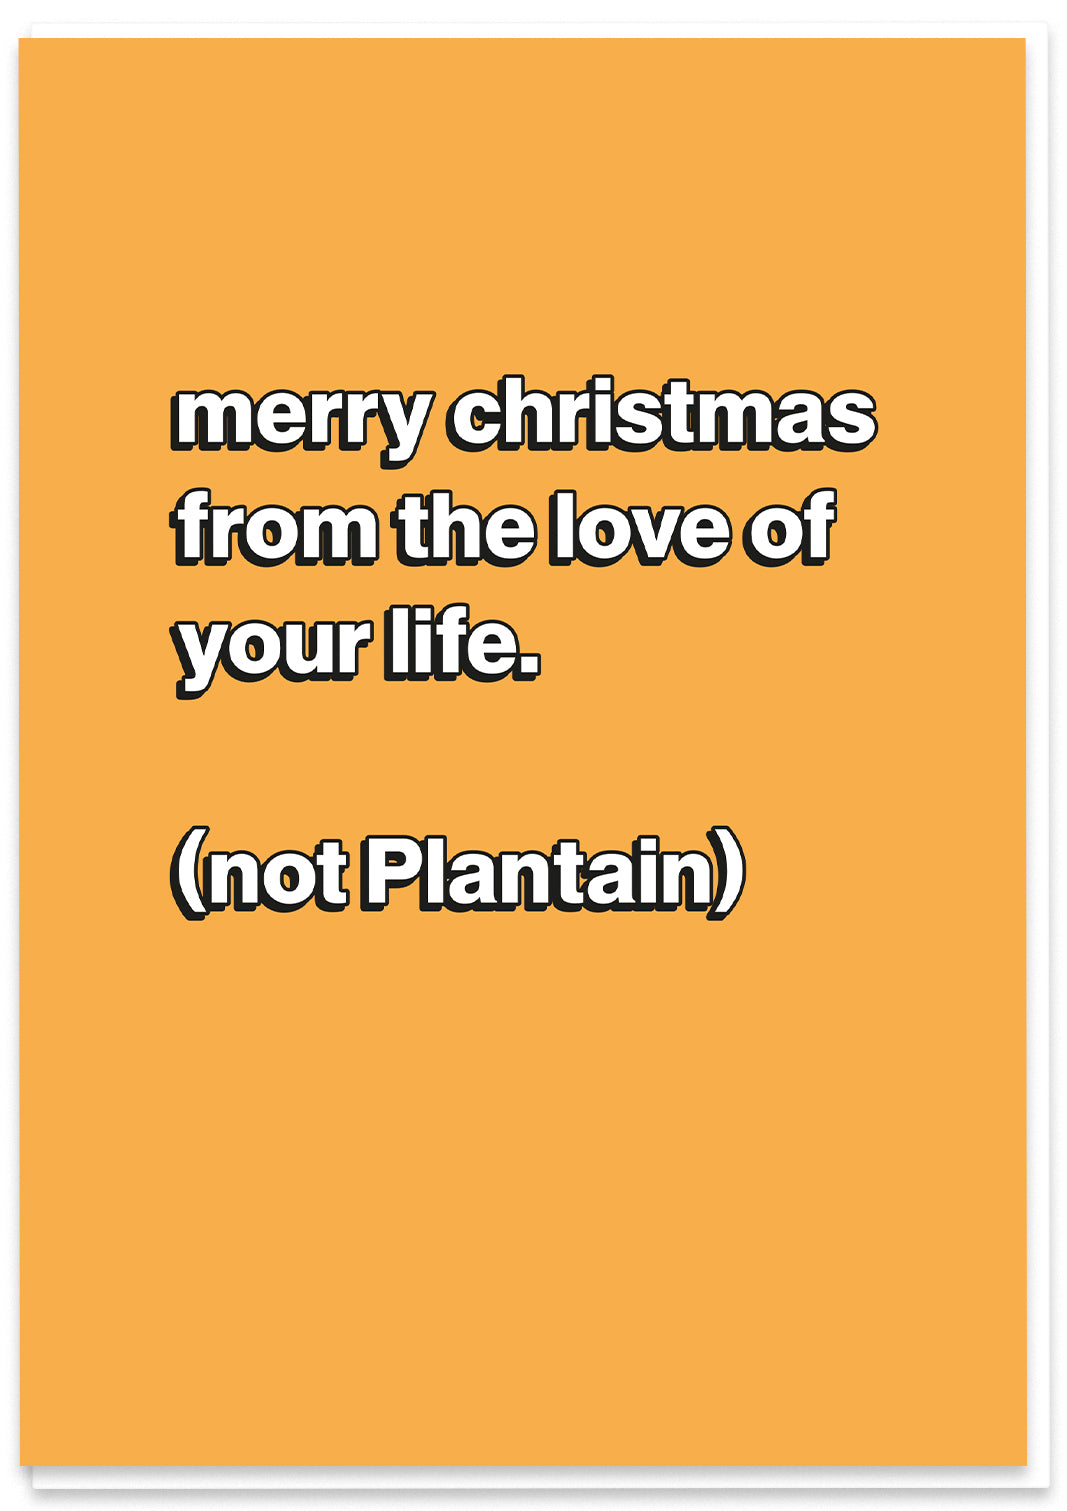 Merry Christmas - Not Plantain